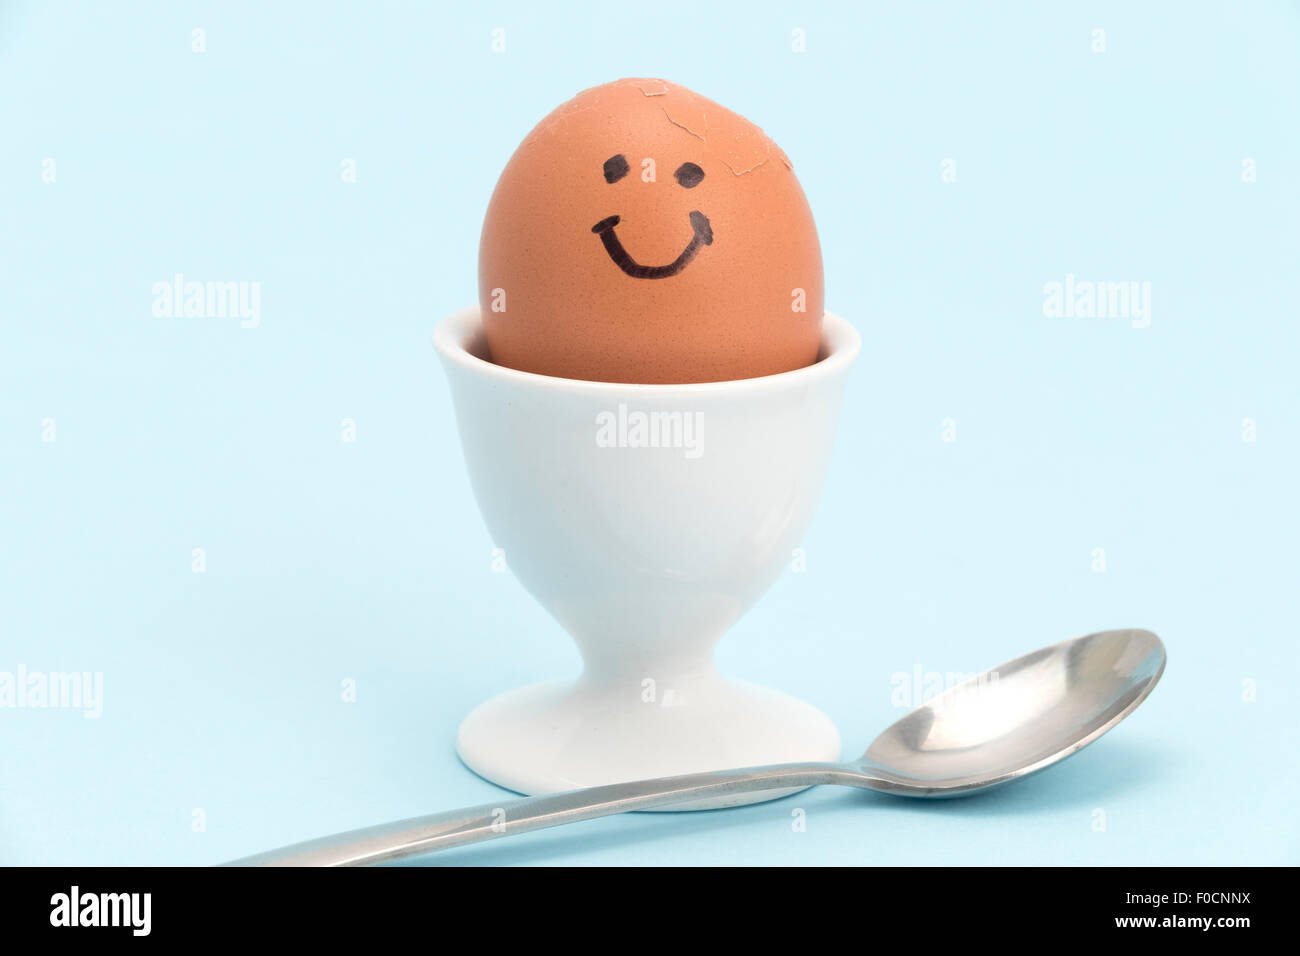 A boiled egg and teaspoon ready to eat - plain background Stock Photo